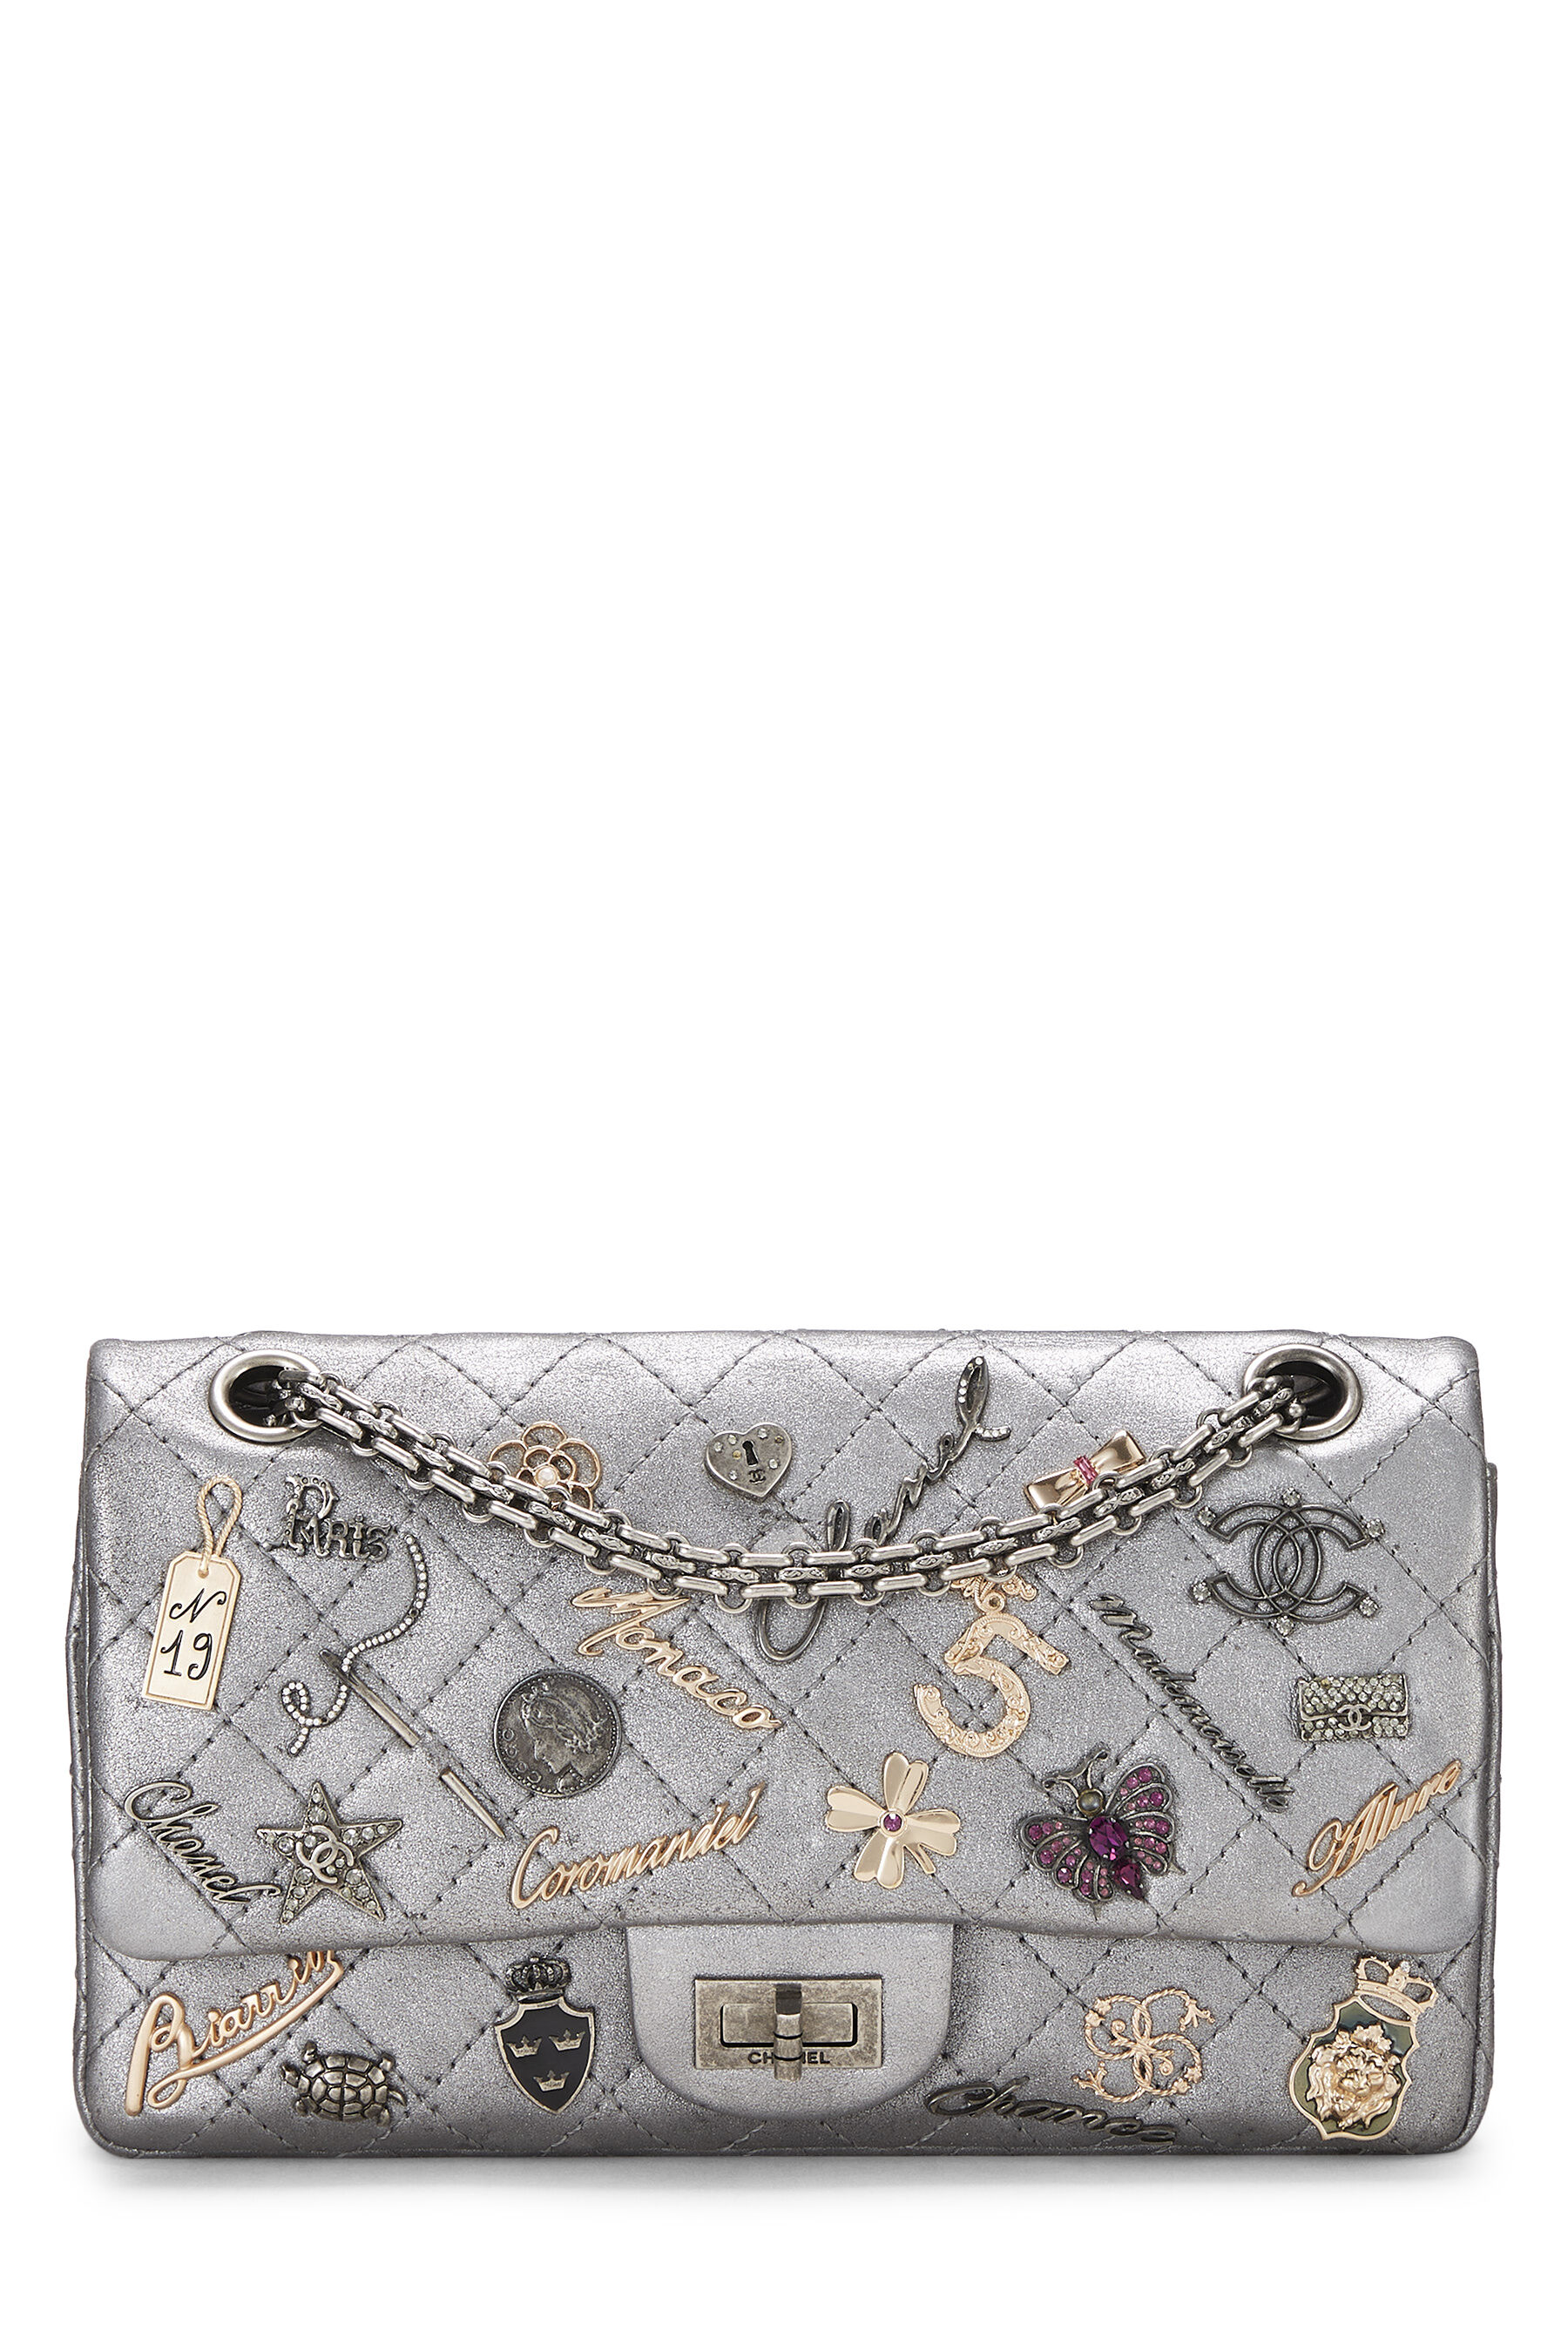 Chanel Silver Lambskin Lucky Charms Shoulder Bag Reissue 225